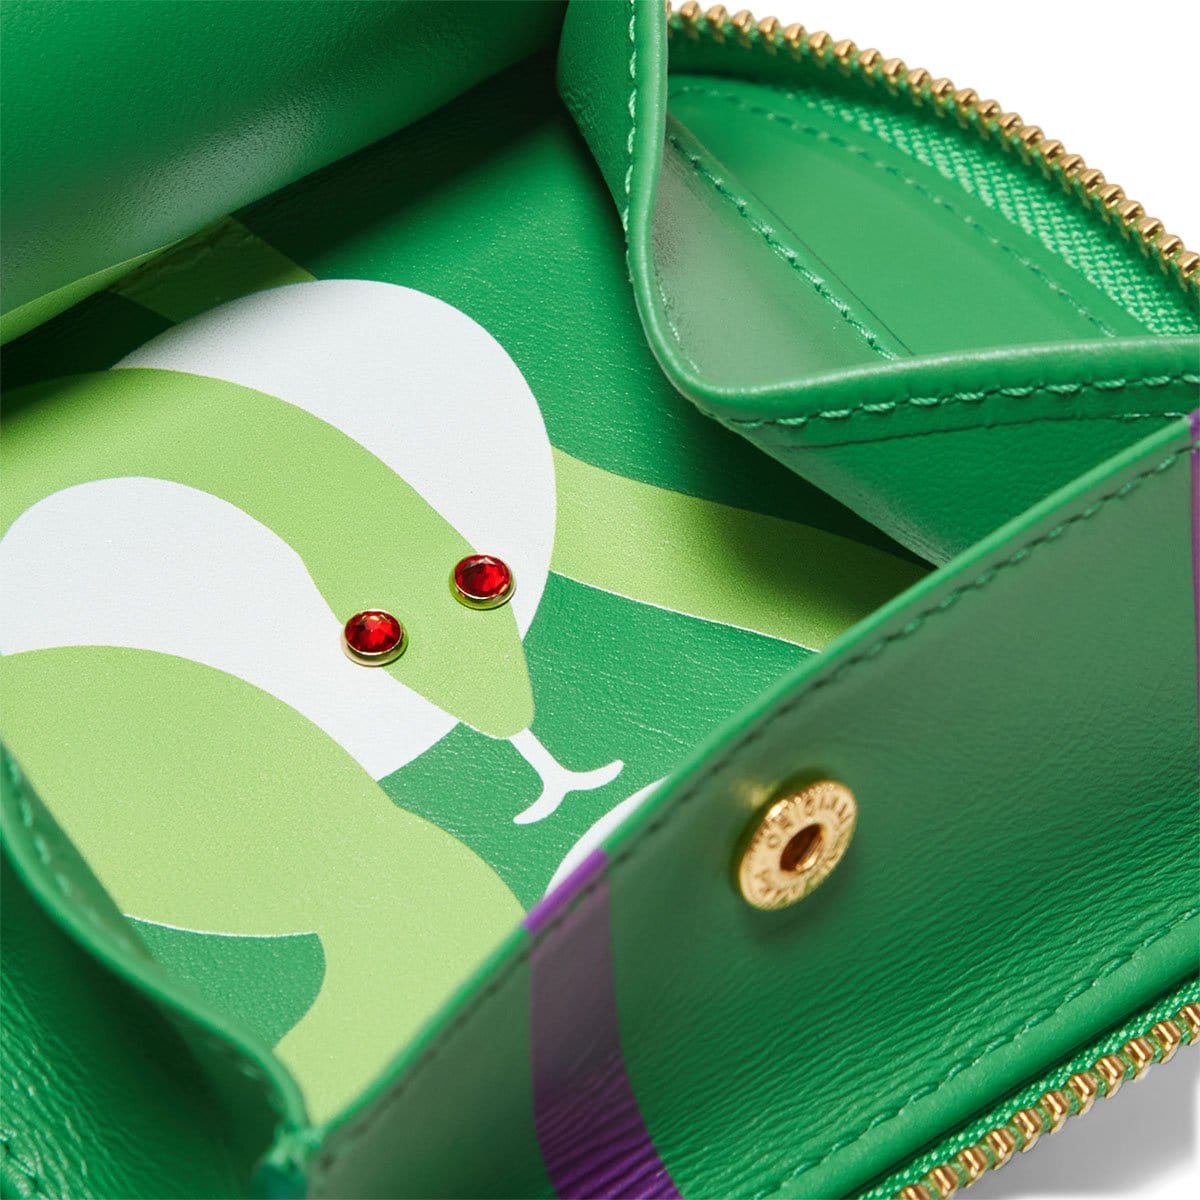 Comme Des Garçons Wallet Bags & Accessories GREEN / O/S RUBY EYES